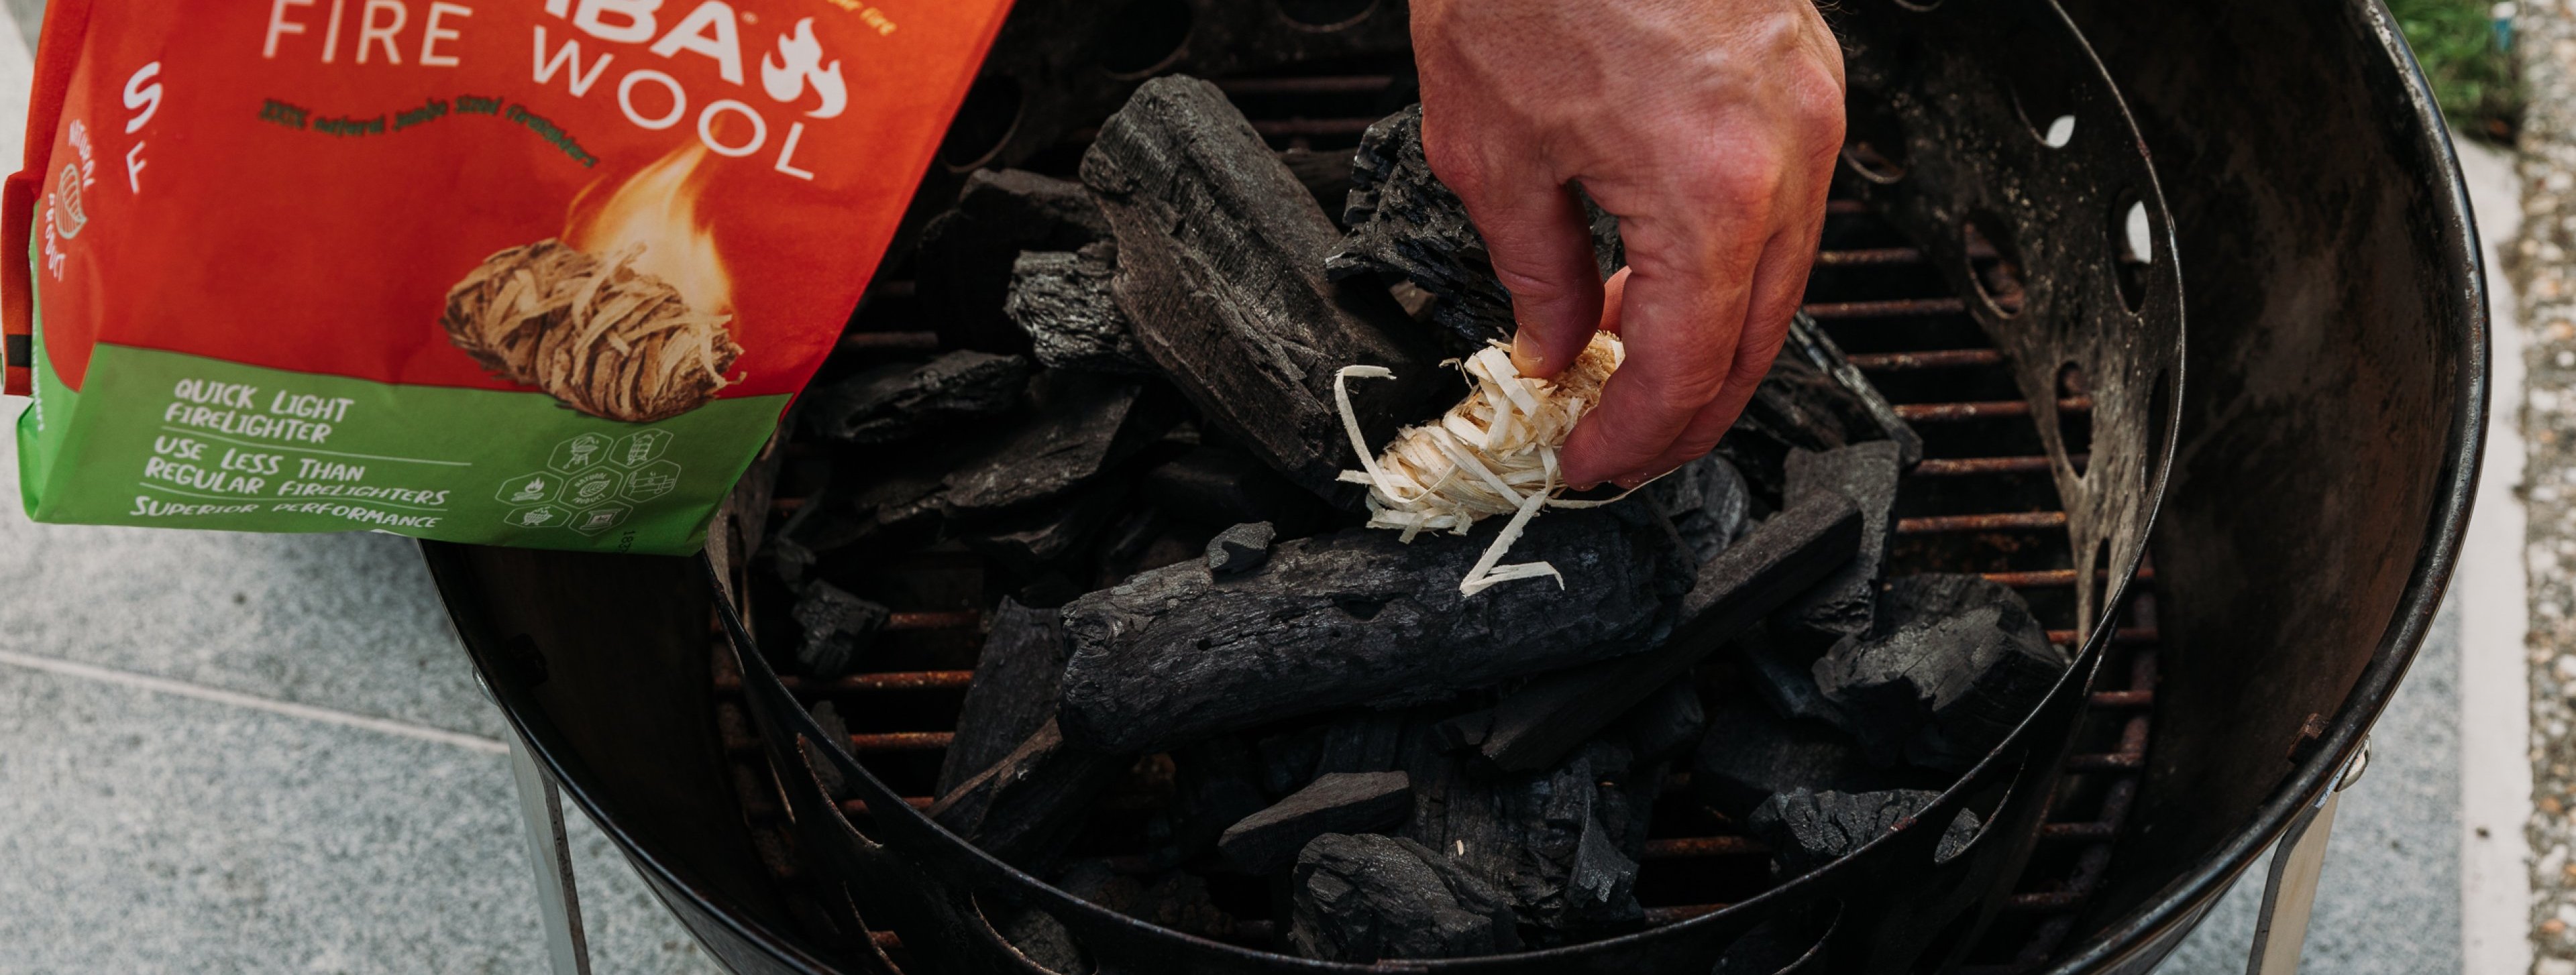 So fire, so good with all-natural Fire Wool Firelighters by Samba